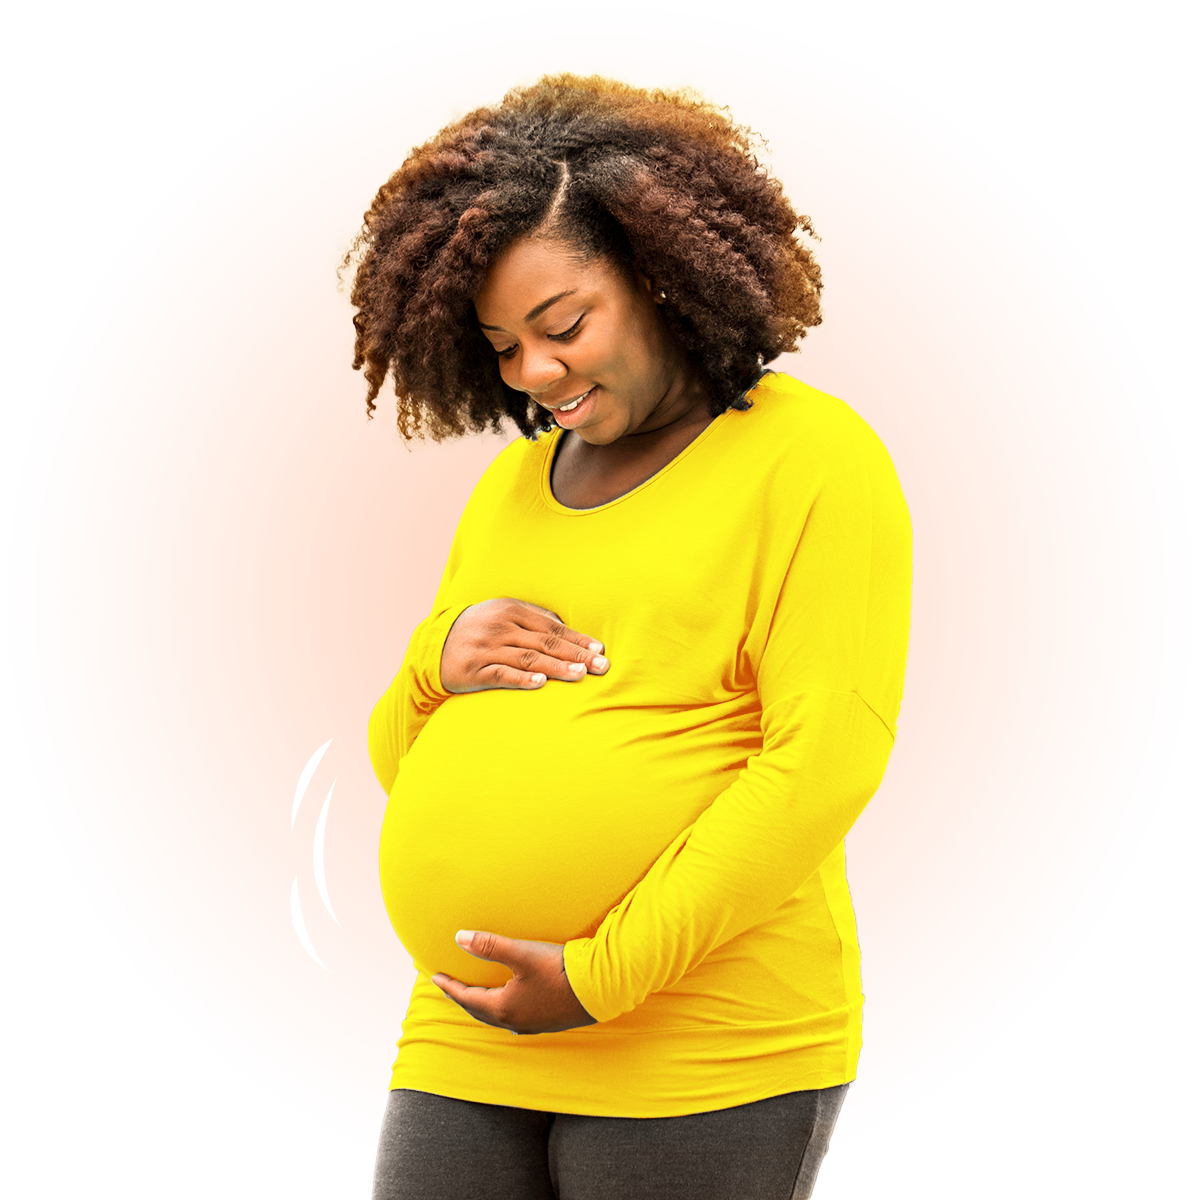 A pregnant woman wearing a yellow long sleeve shirt smiles as she cradles her stomach.